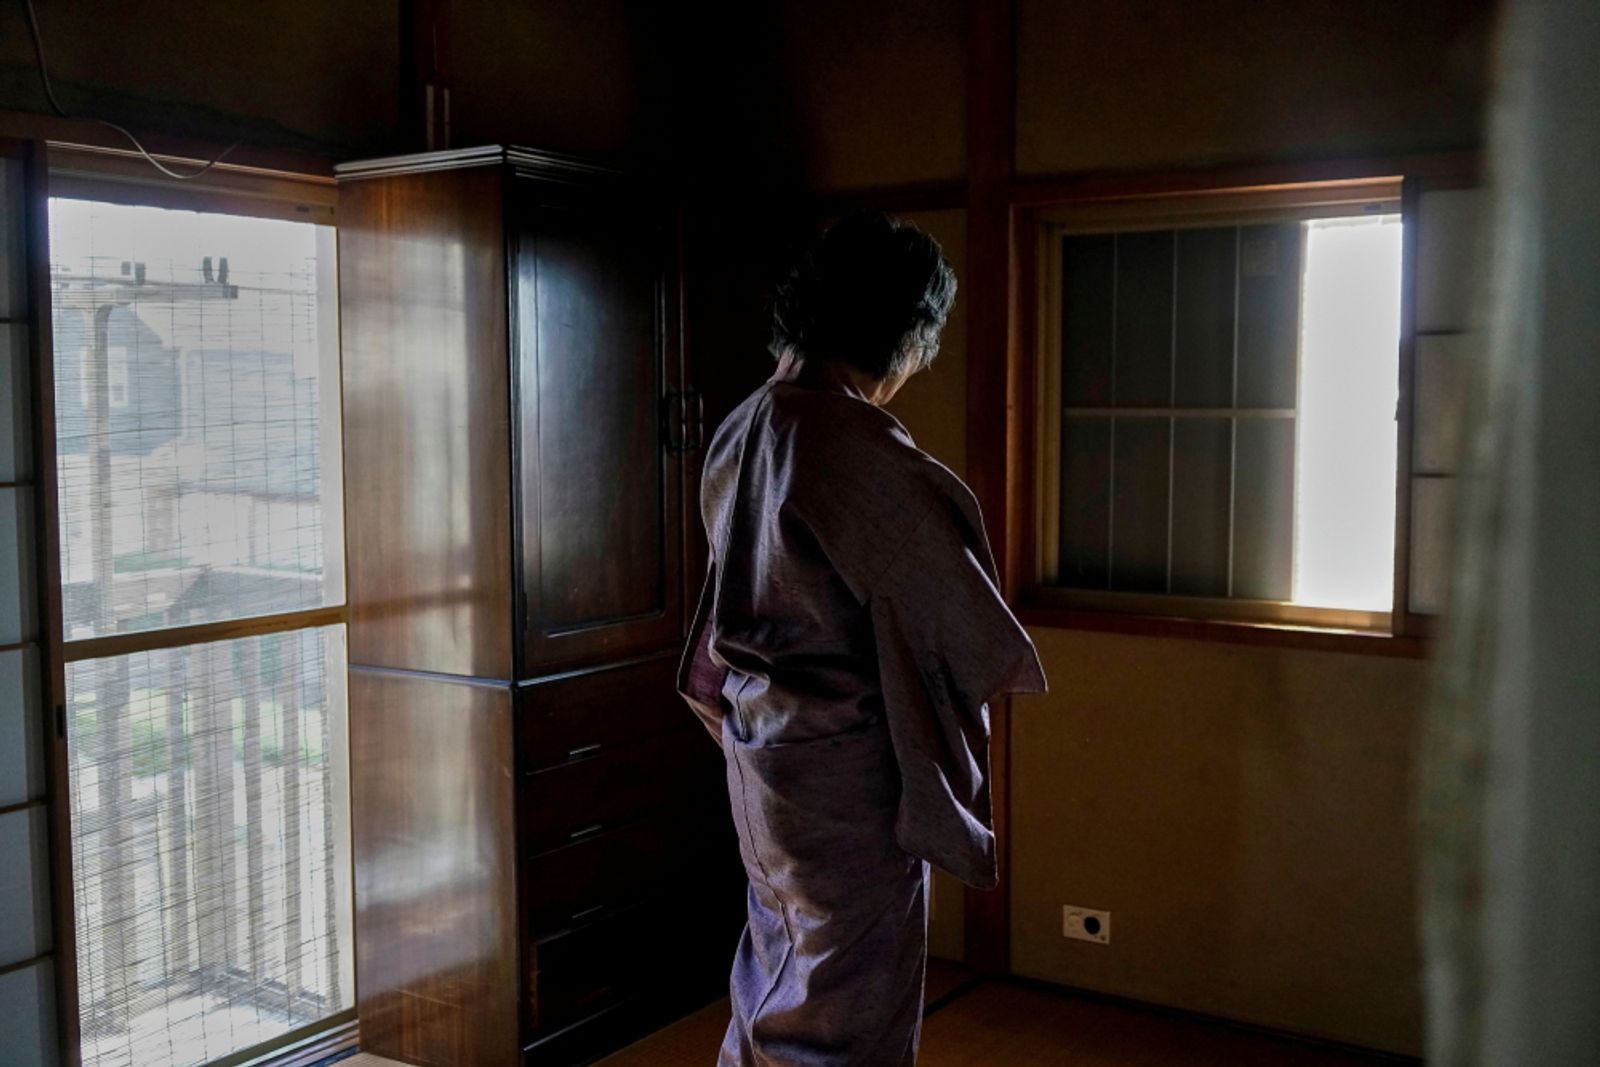 © Kai Yokoyama - My mother doesn't go out because of this pandemic, but she wears a kimono at home. This is a memento of her late mother.